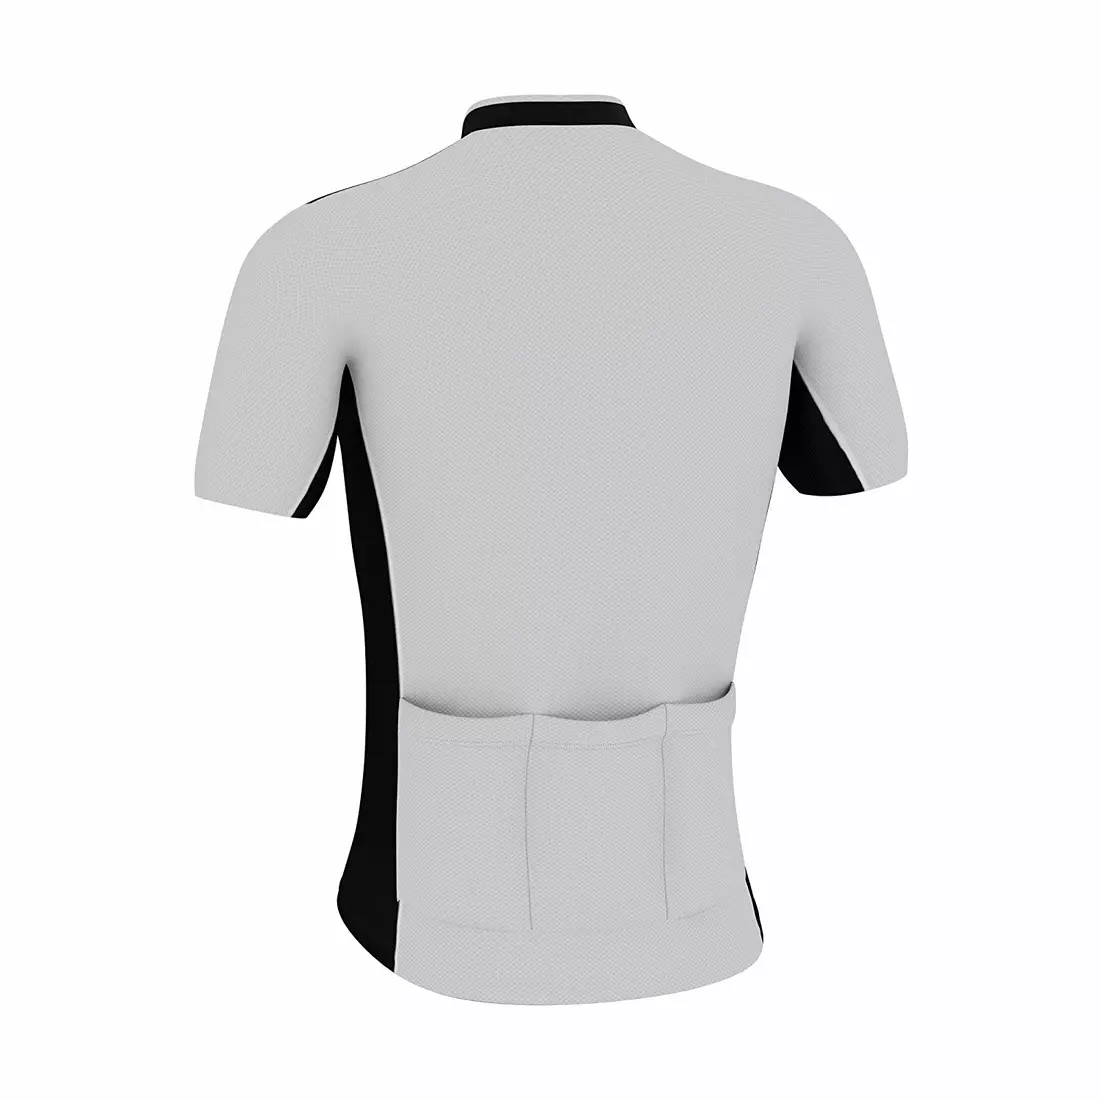 FDX 1100 cycling jersey, white and black